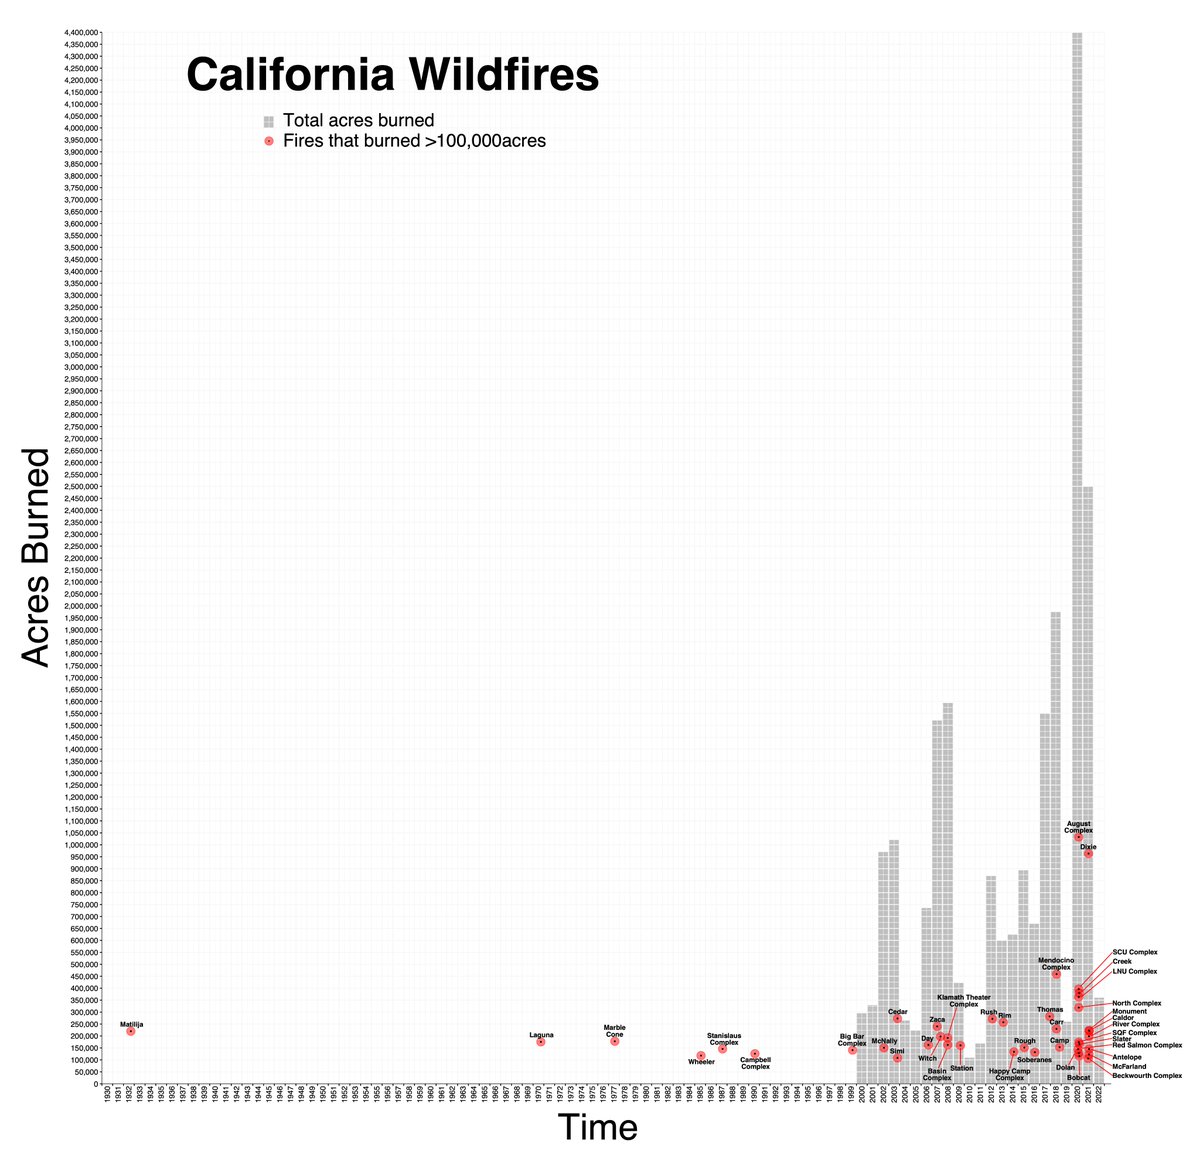 Having a data/file organizing day and realized I never finished my annual tradition of updating this plot of CA wildfires (total acres burned +highlighting specific named fires that burned >100,000acres). 2022 was a phenomenally moist year, with nary a fire >100K!🔥